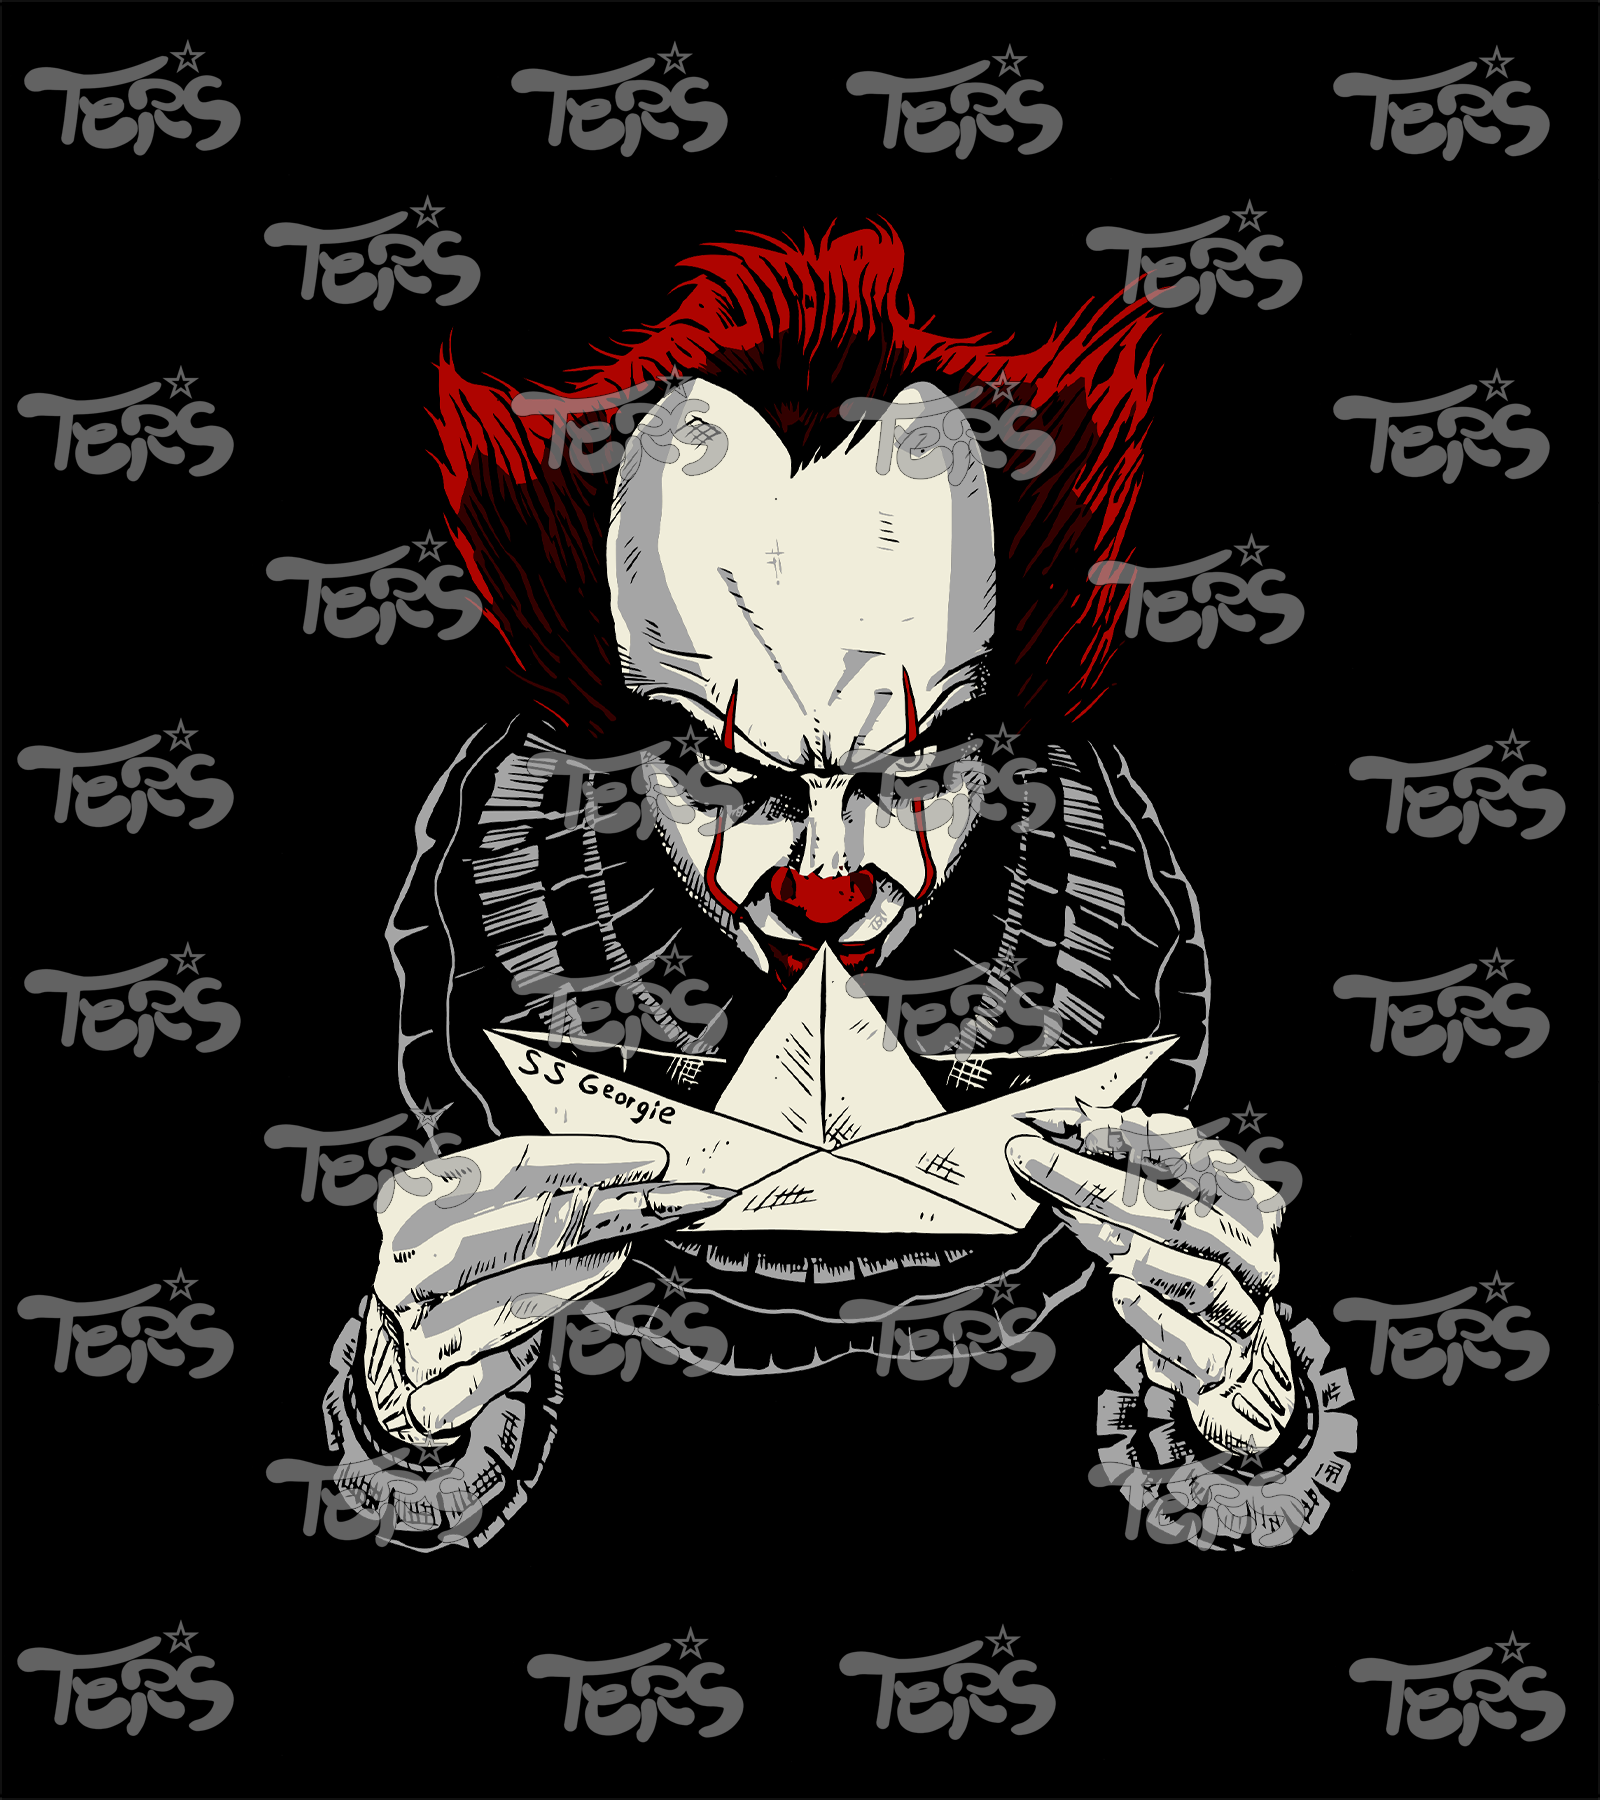 Mouse Pad Pennywise Barco